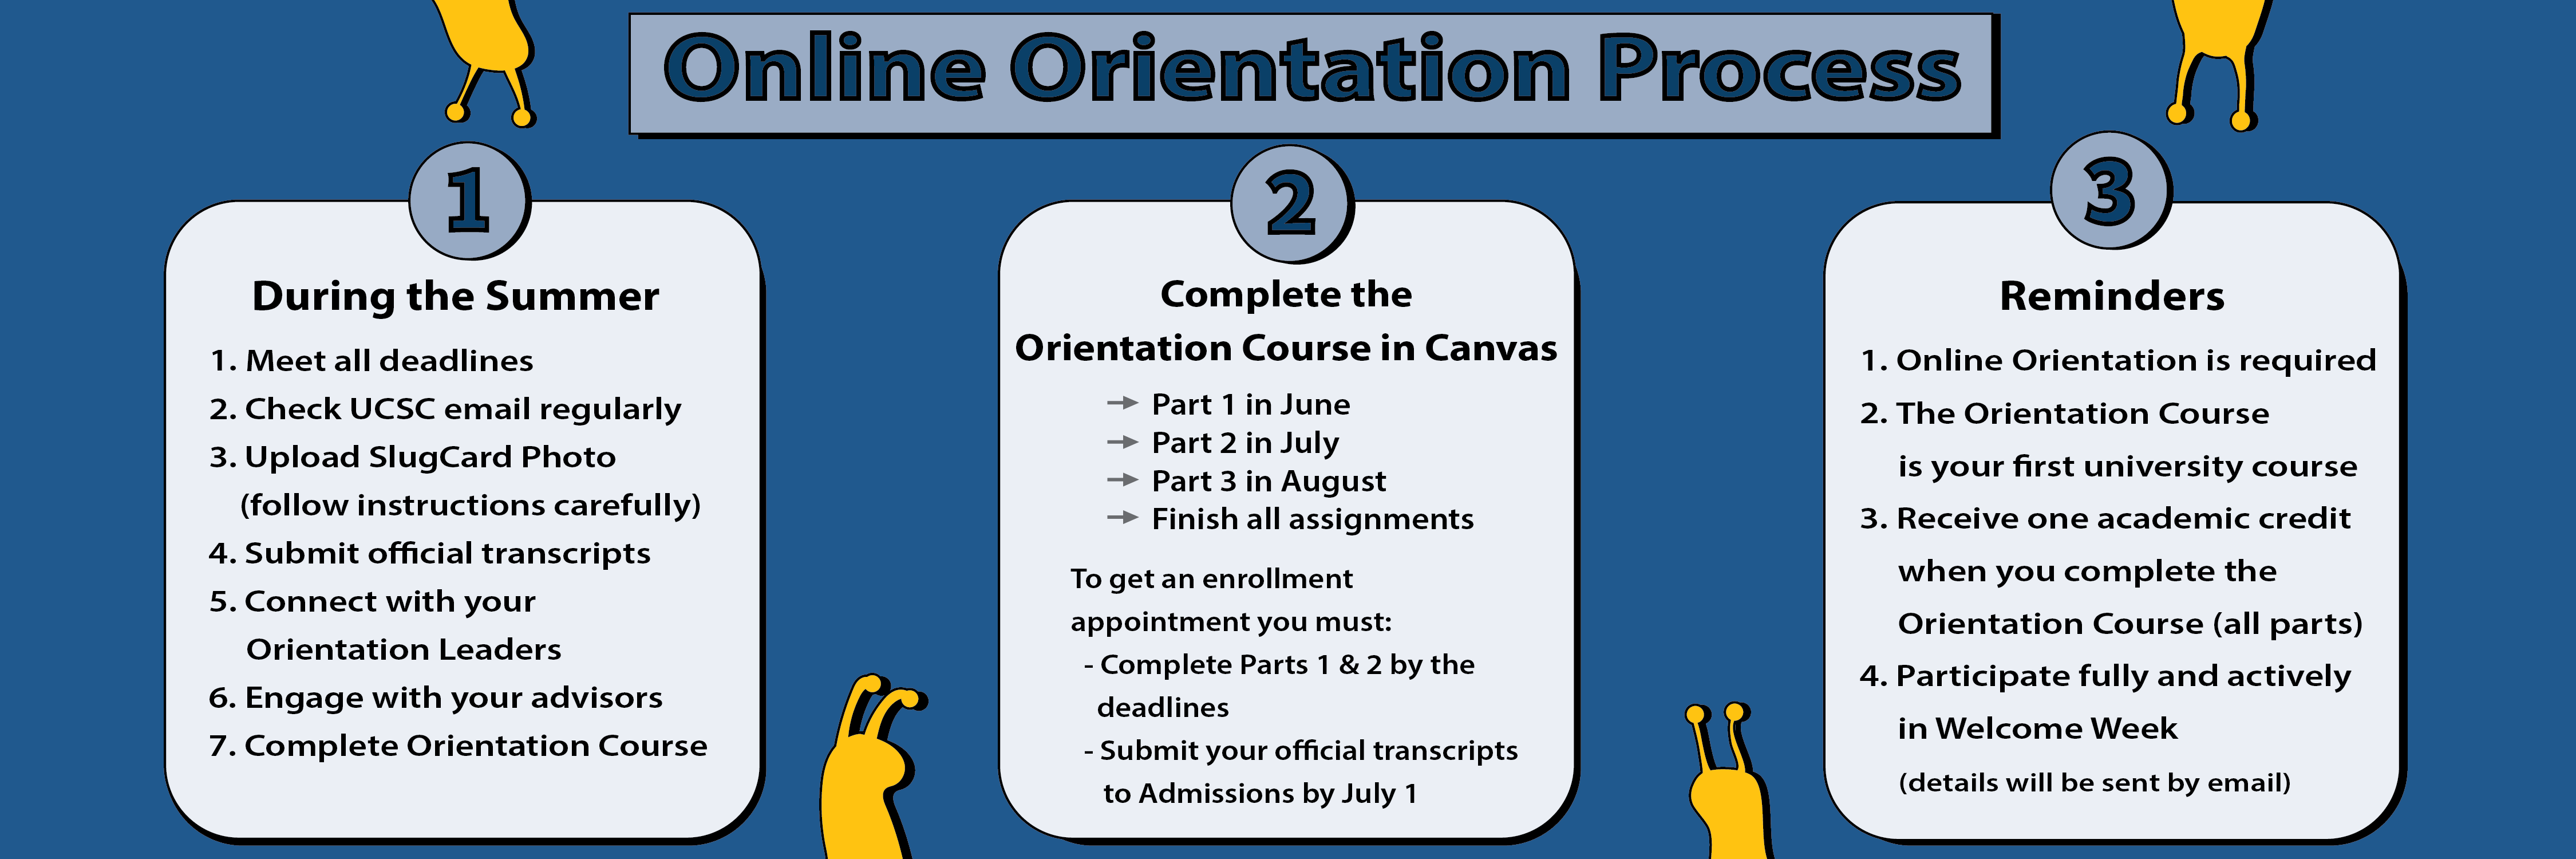 Next steps 1, 2, 3 instructions for new students.